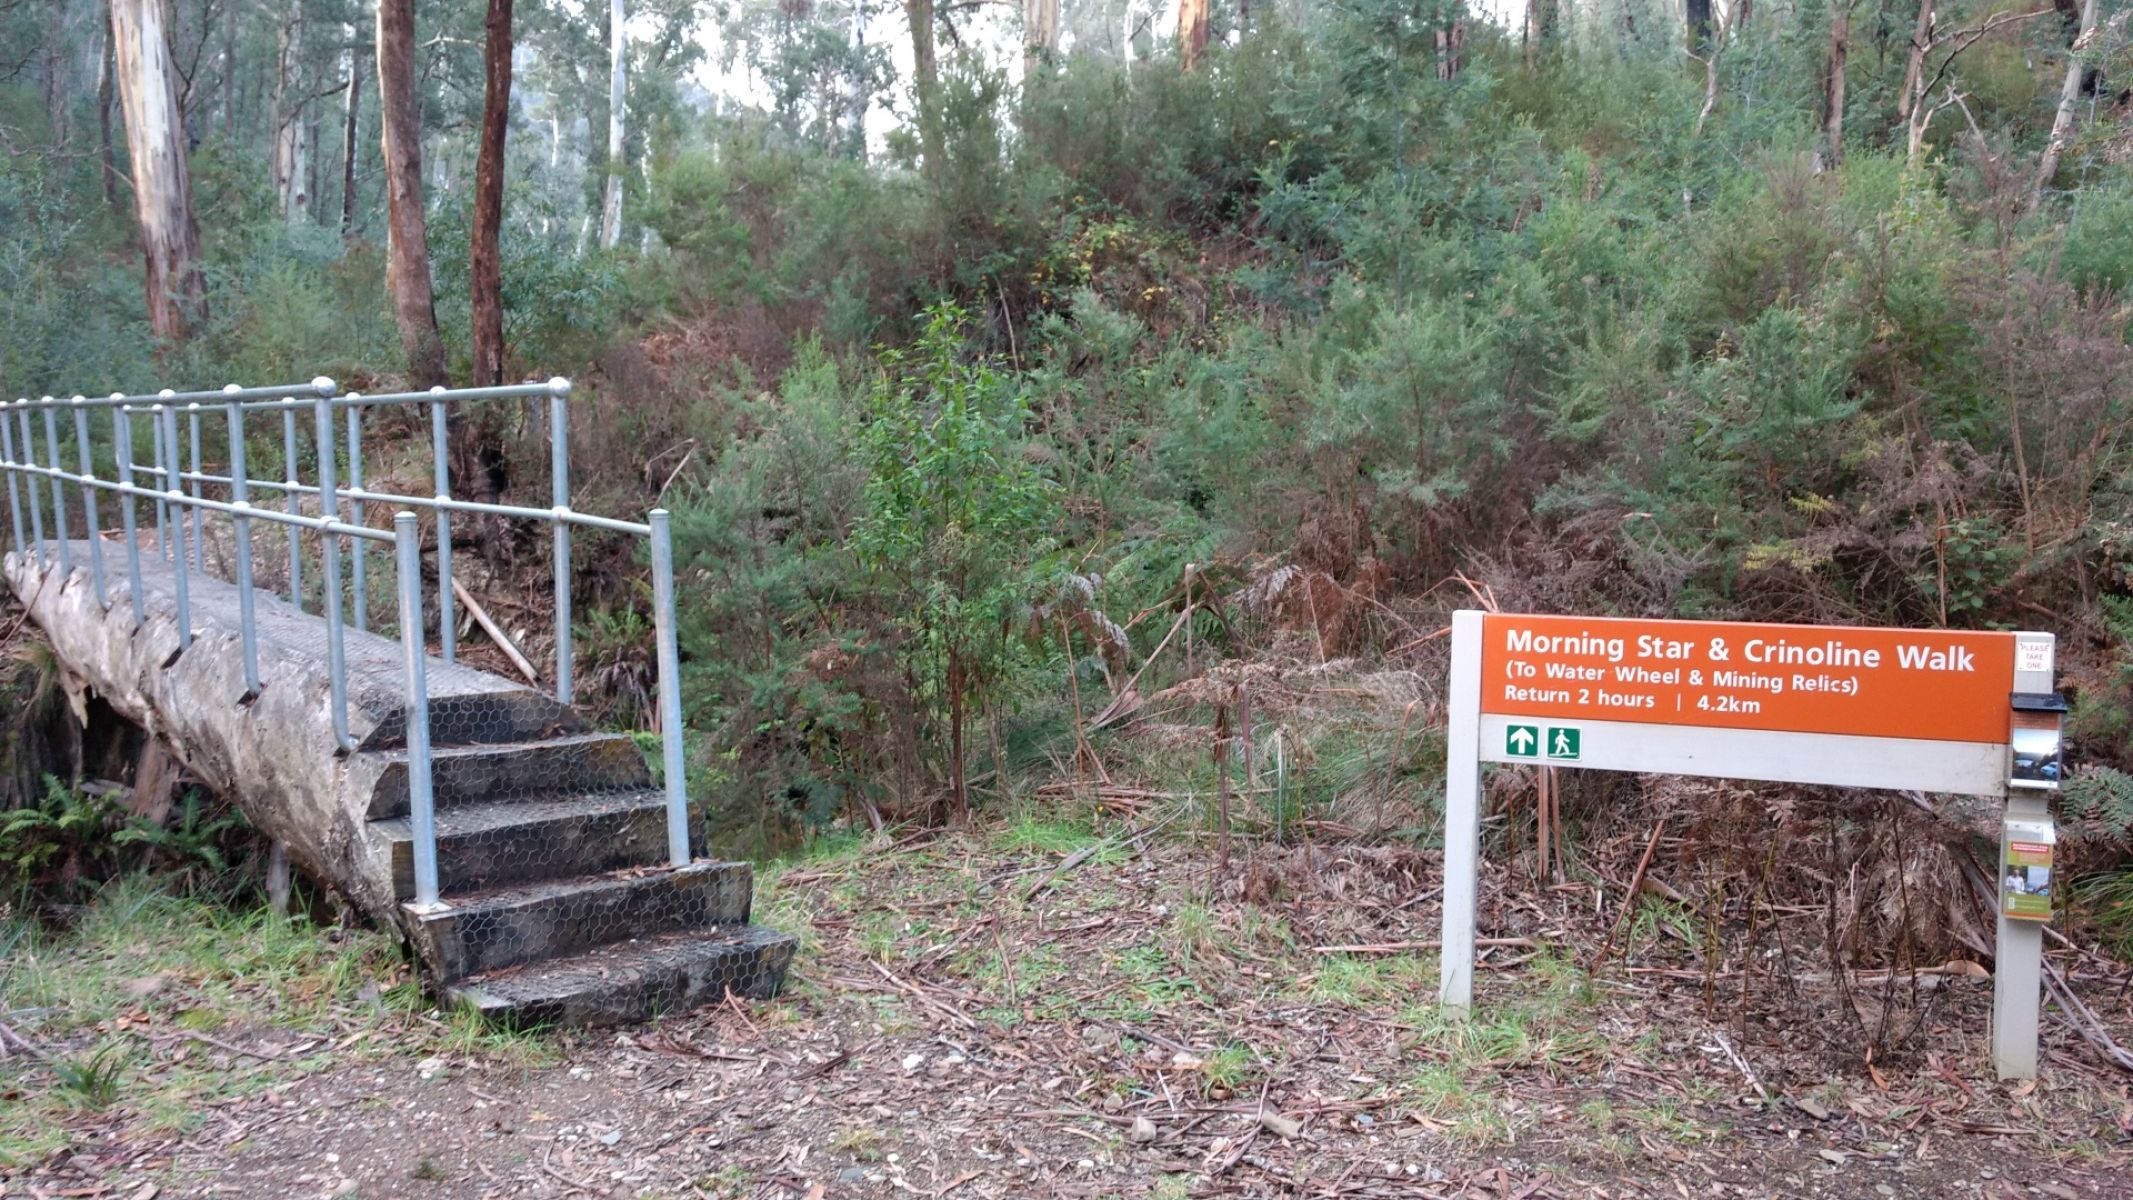 A sign for Morning Star Walk next to a log pathway